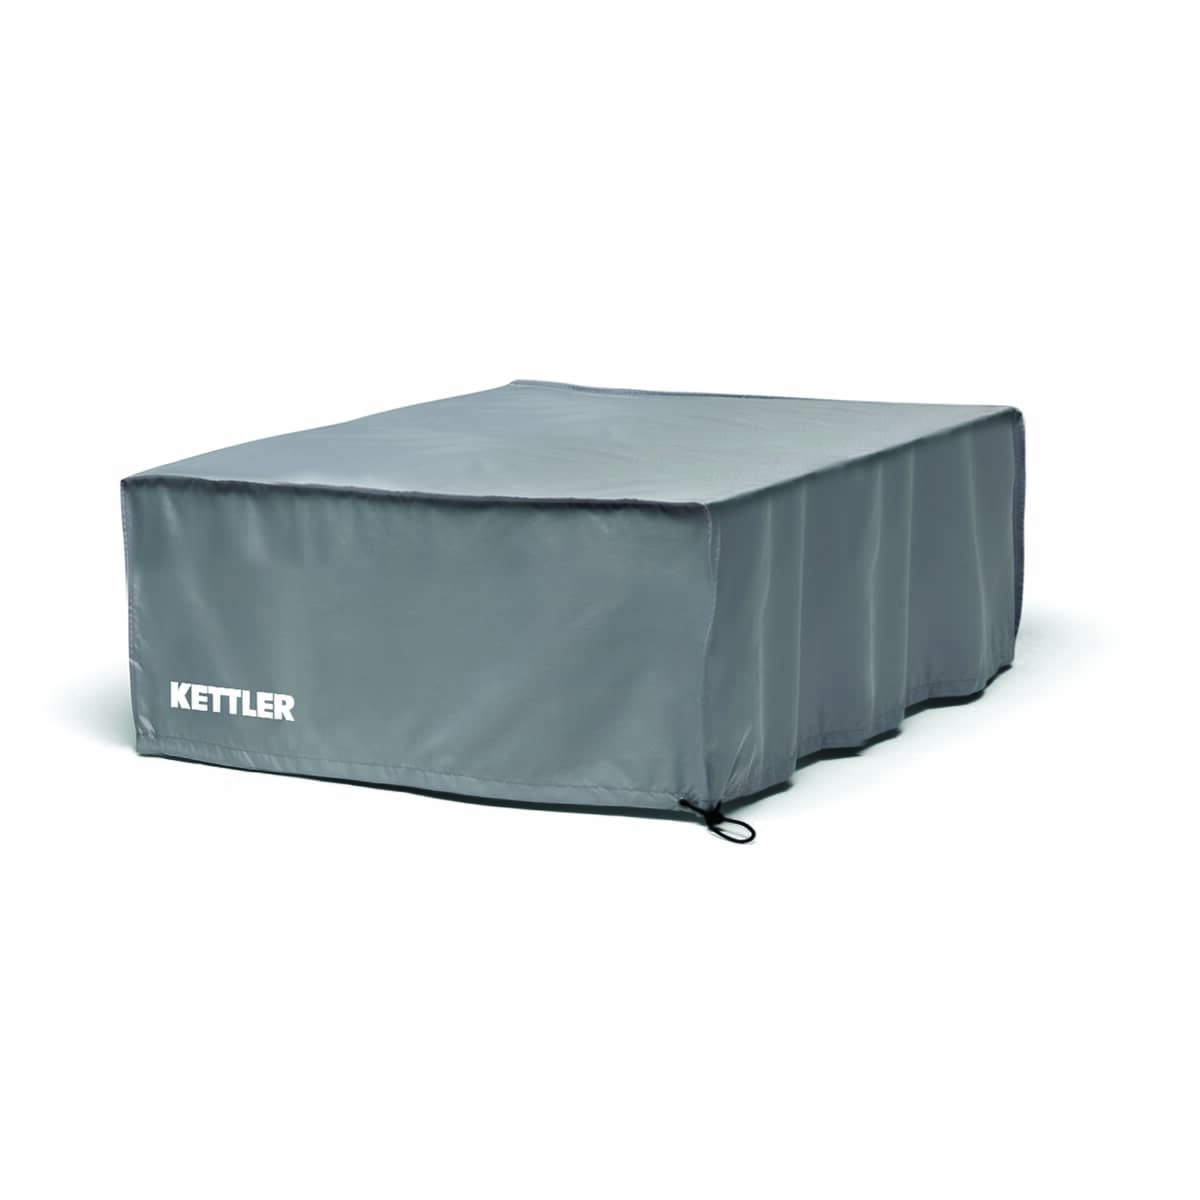 Kettler Palma Low Fire Pit Table Protective Cover